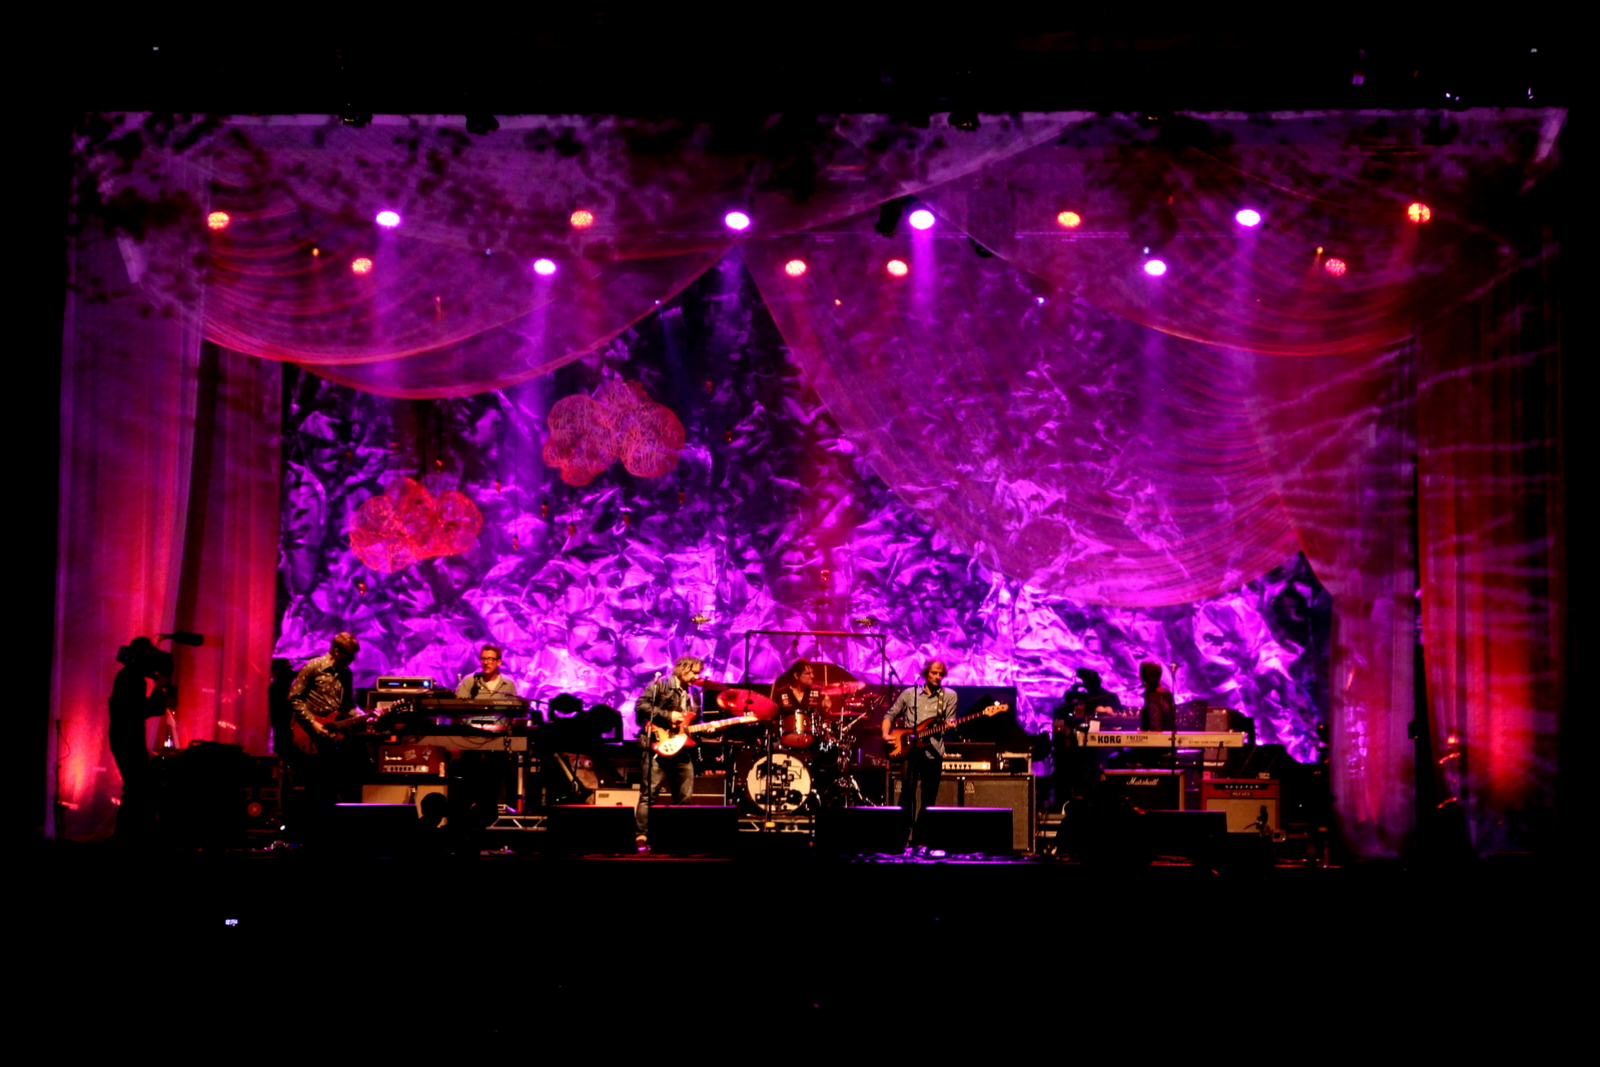 Wilco Solid Sound 2013 - Lighting - Projection - Scenic Design - Jeremy Roth